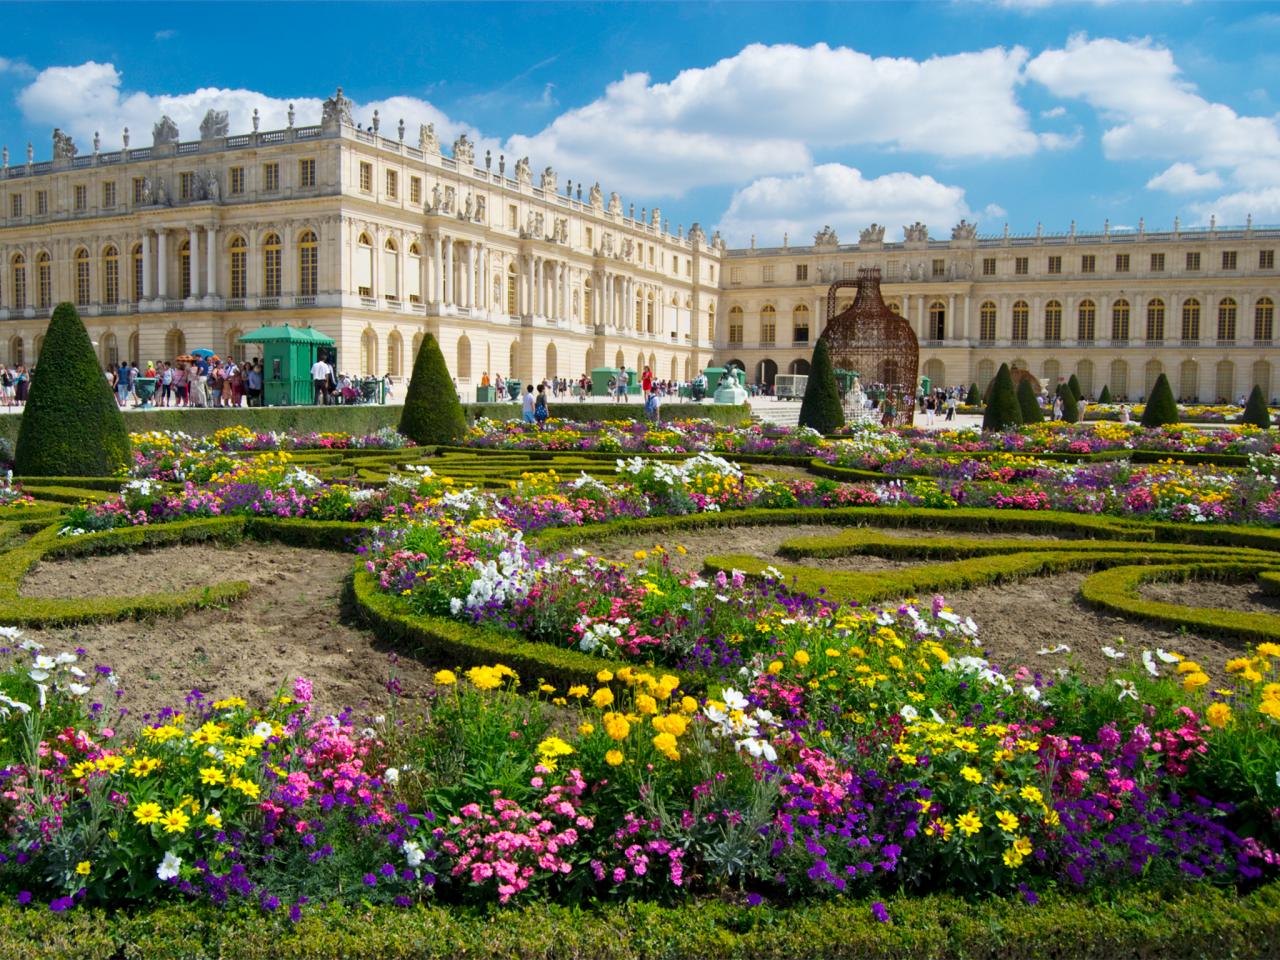 How many flowers are in the palace of versailles garden